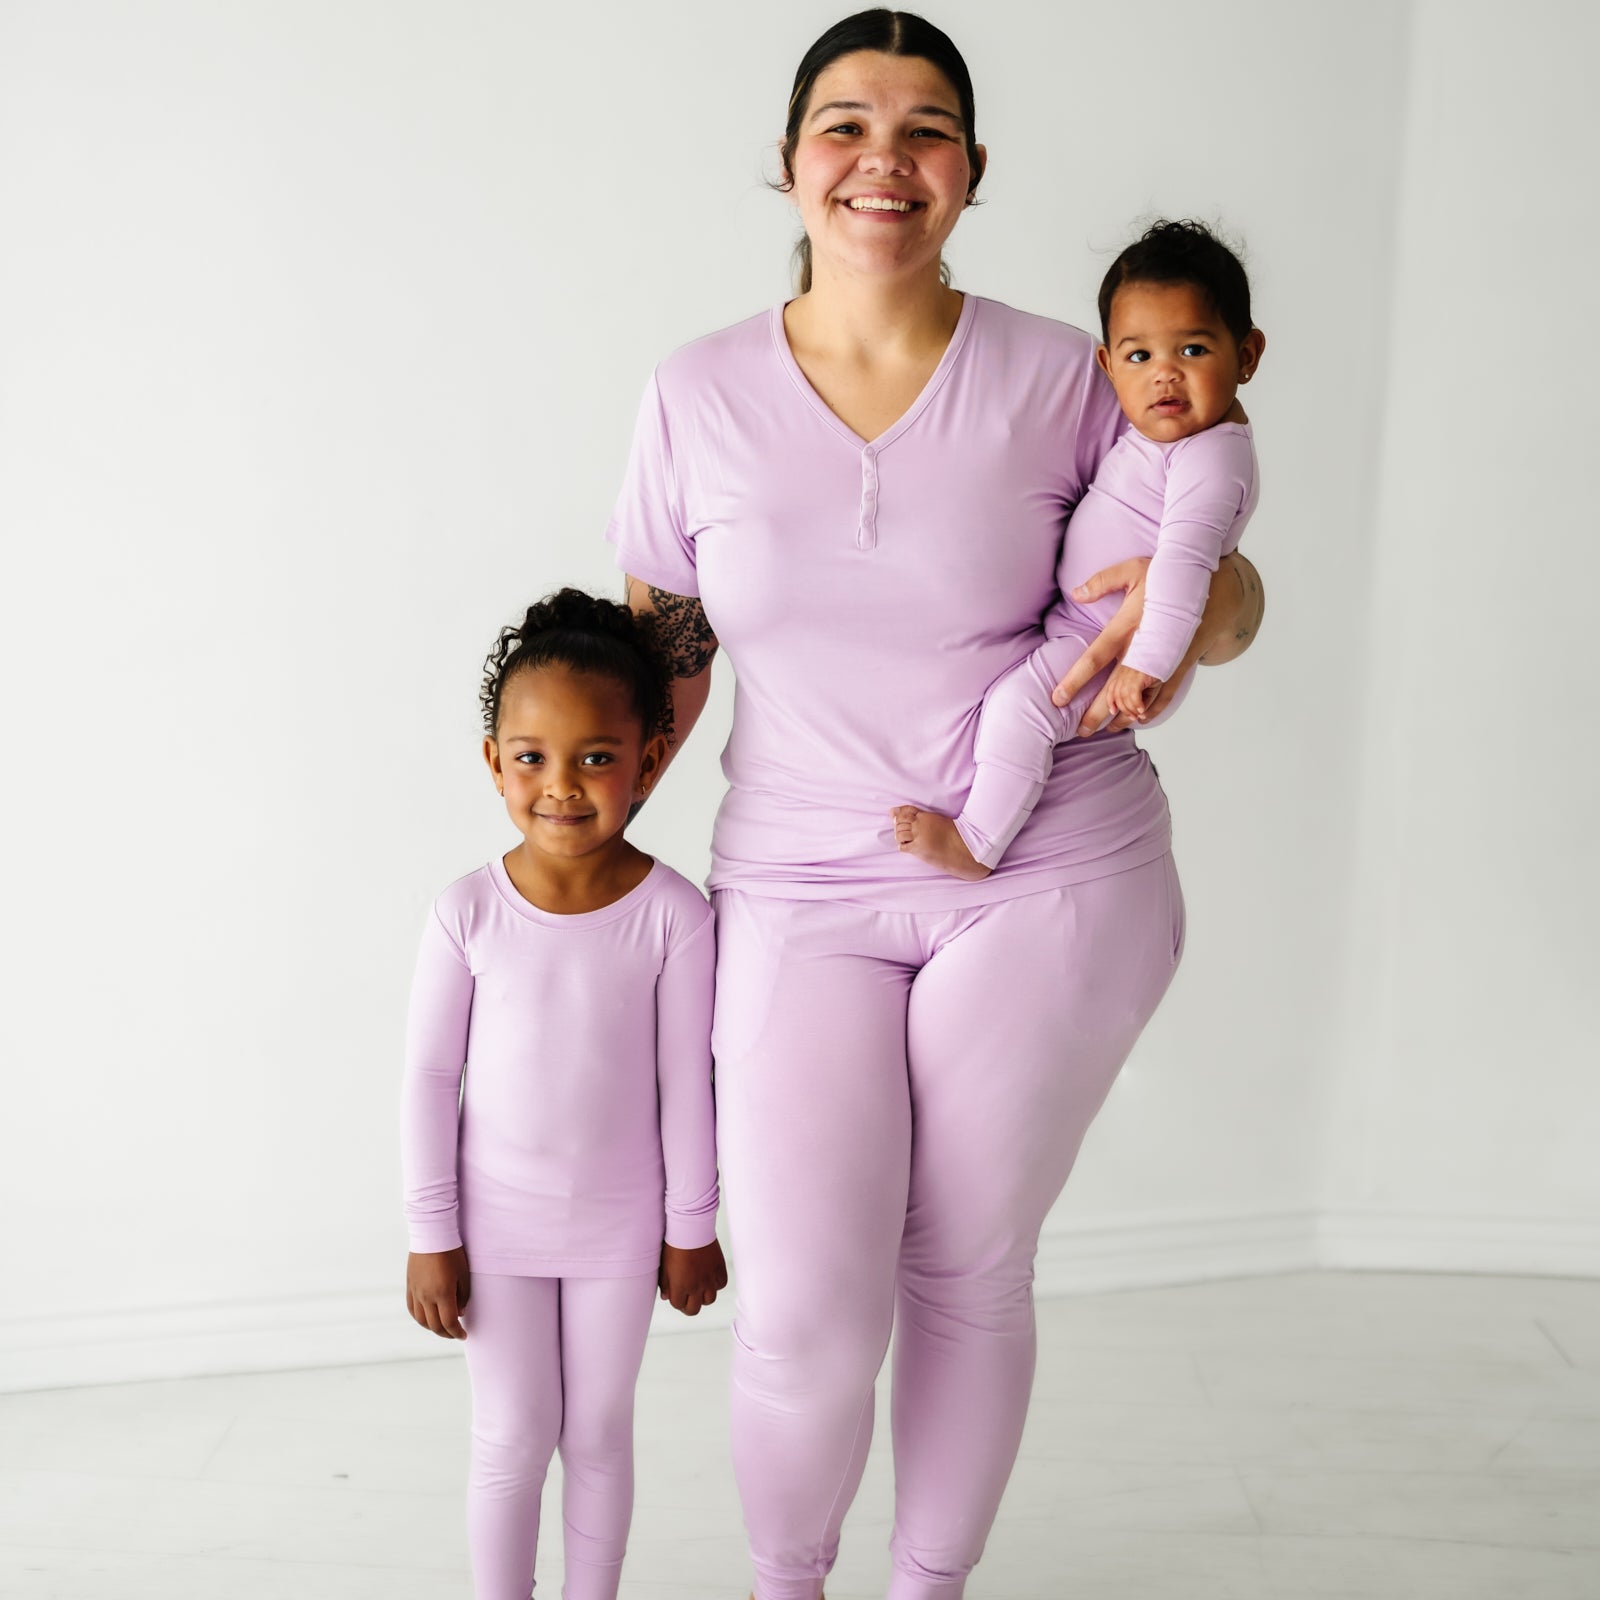 Family of three wearing matching Light Orchard pajama sets. mom is wearing women's Light Orchard women's pajama top and matching women's pj pants. Kids are wearing matching Light Orchard two piece and zippy styles 